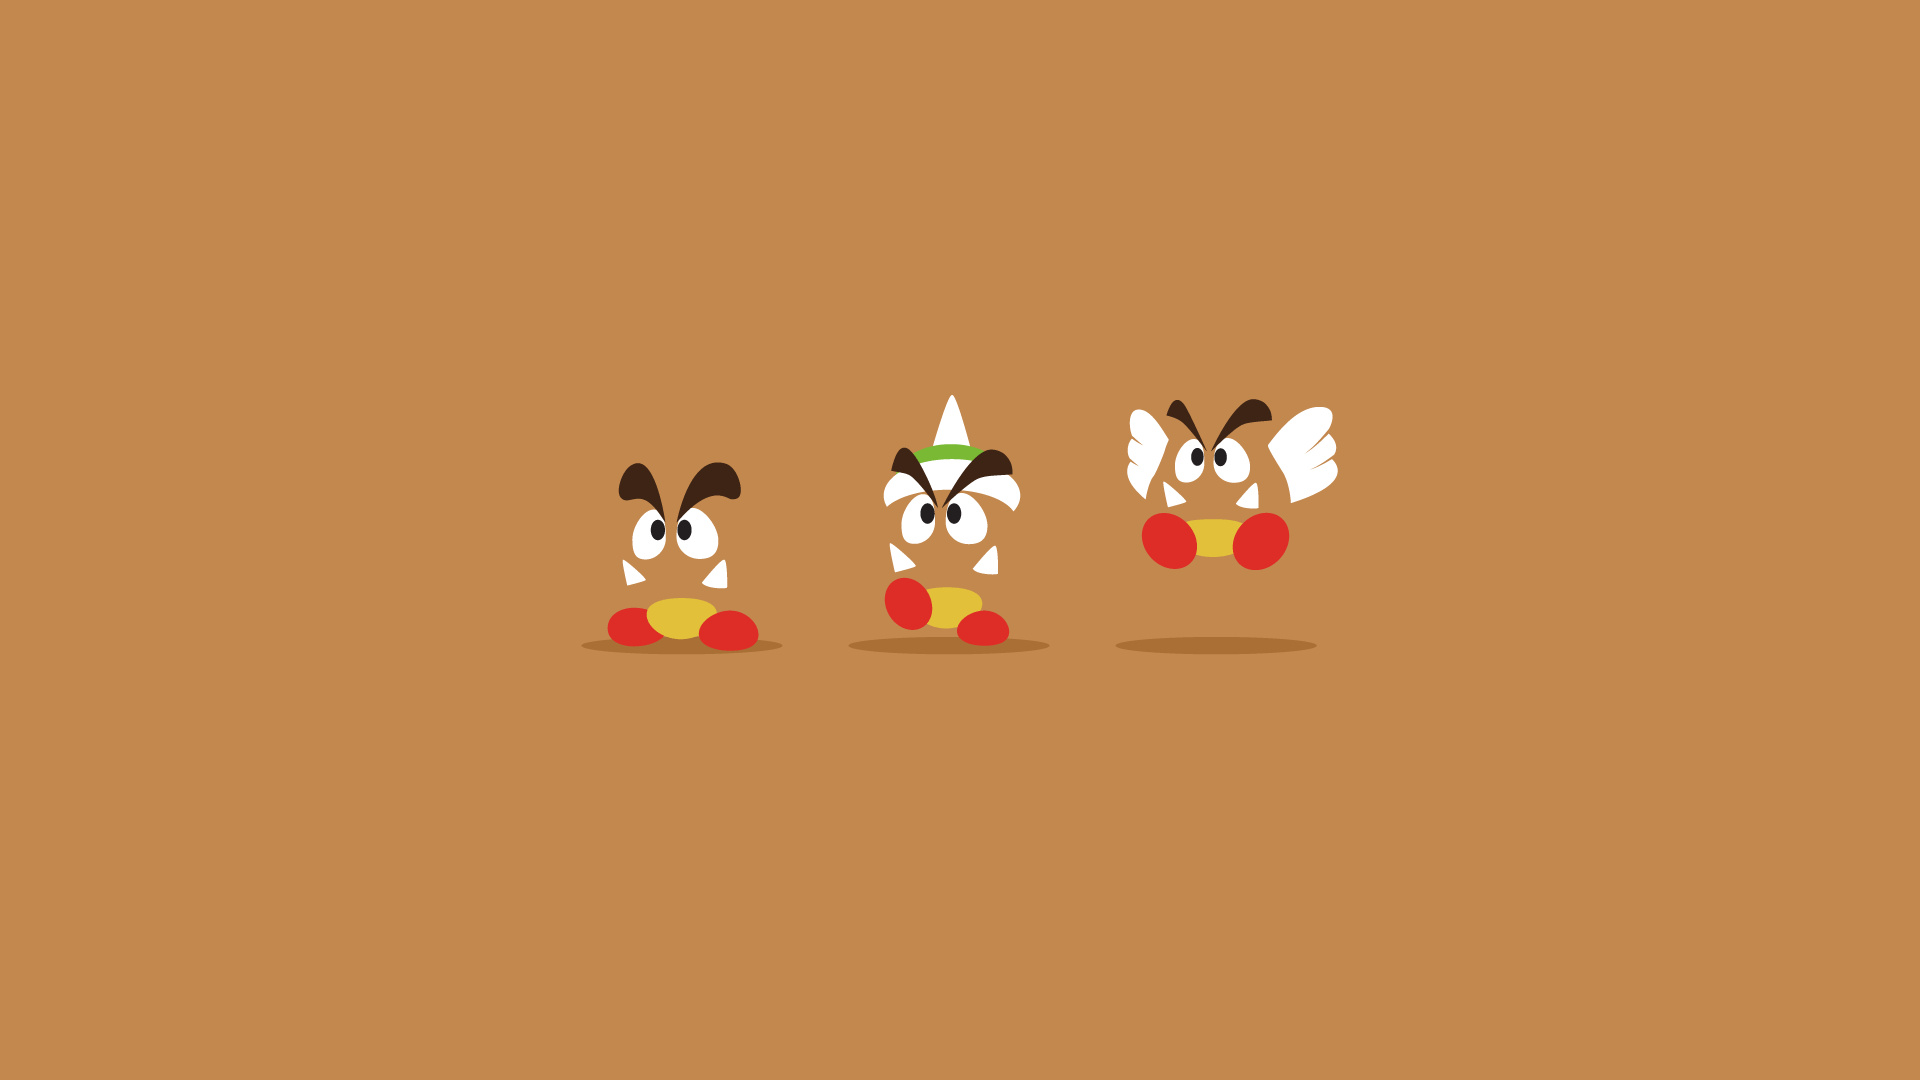 Goomba: Several types of Goombas in Super Mario series, Paragoombas, A brown mushroom-like creatures with dark brown legs. 1920x1080 Full HD Background.